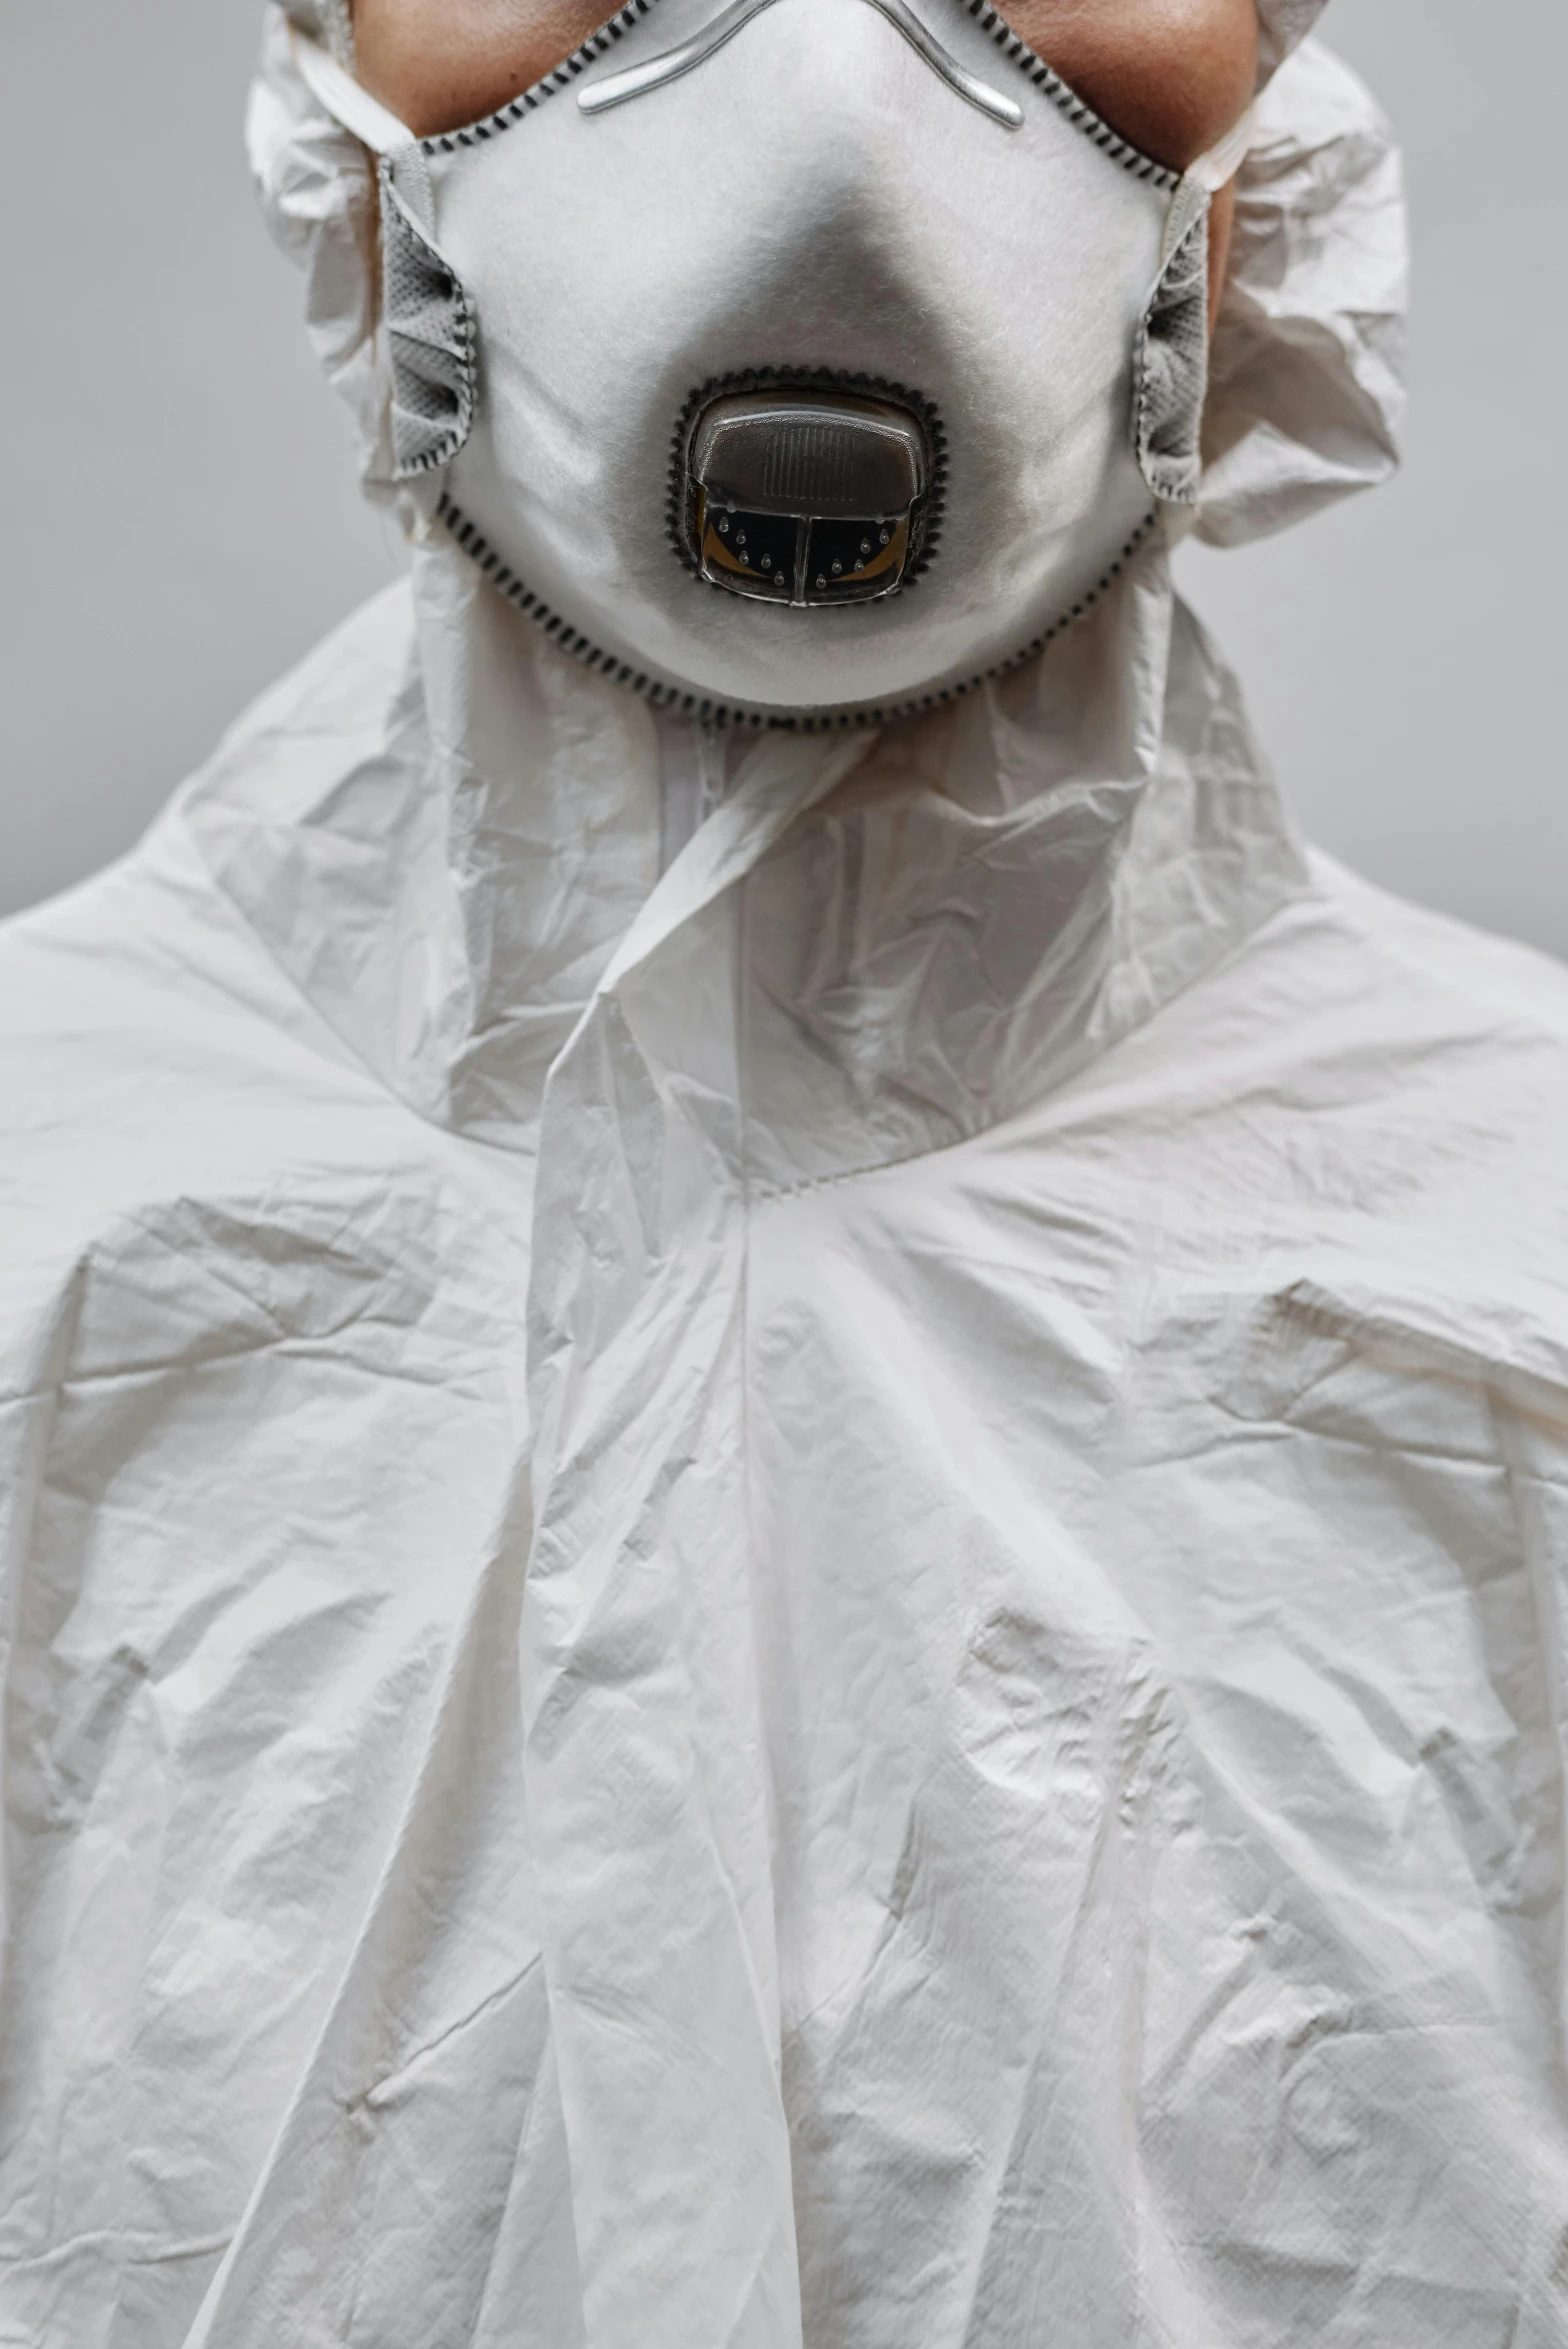 a man wearing a protective suit and a gas mask, reddit, hyperrealism, white cloth, neck zoomed in, 155 cm tall, hyperrealistic n- 4